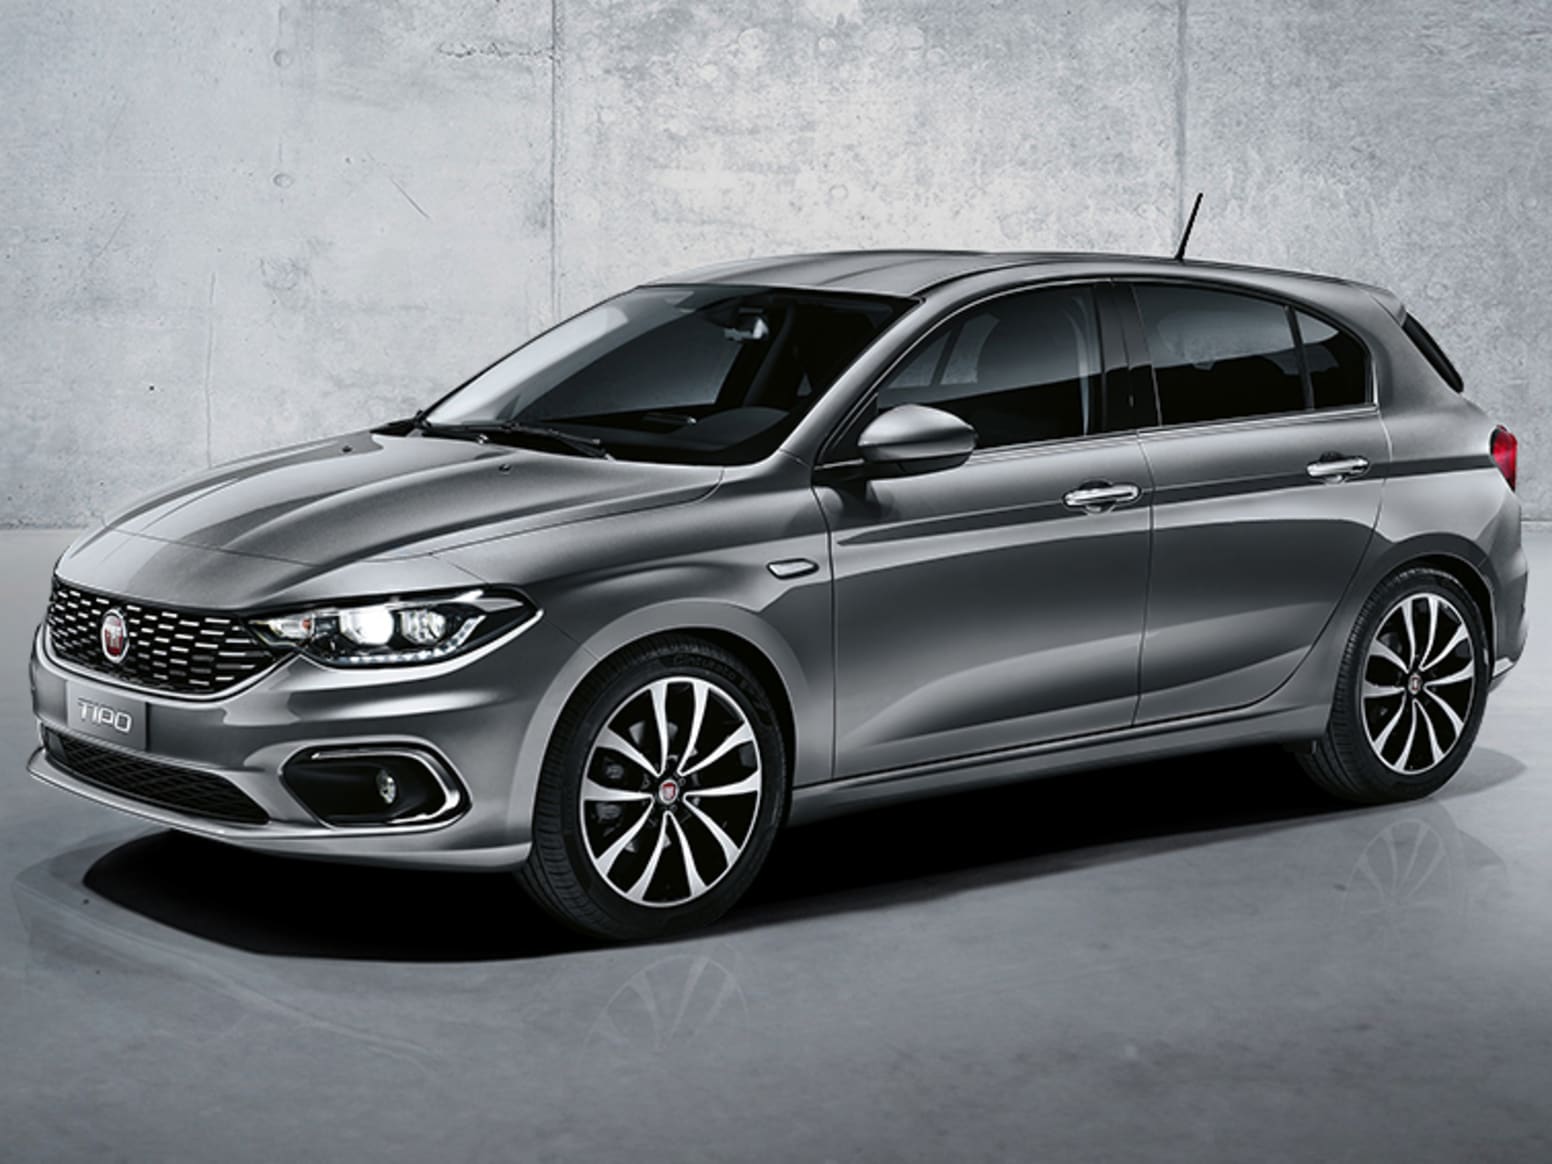 Fiat Tipo Side Exterior